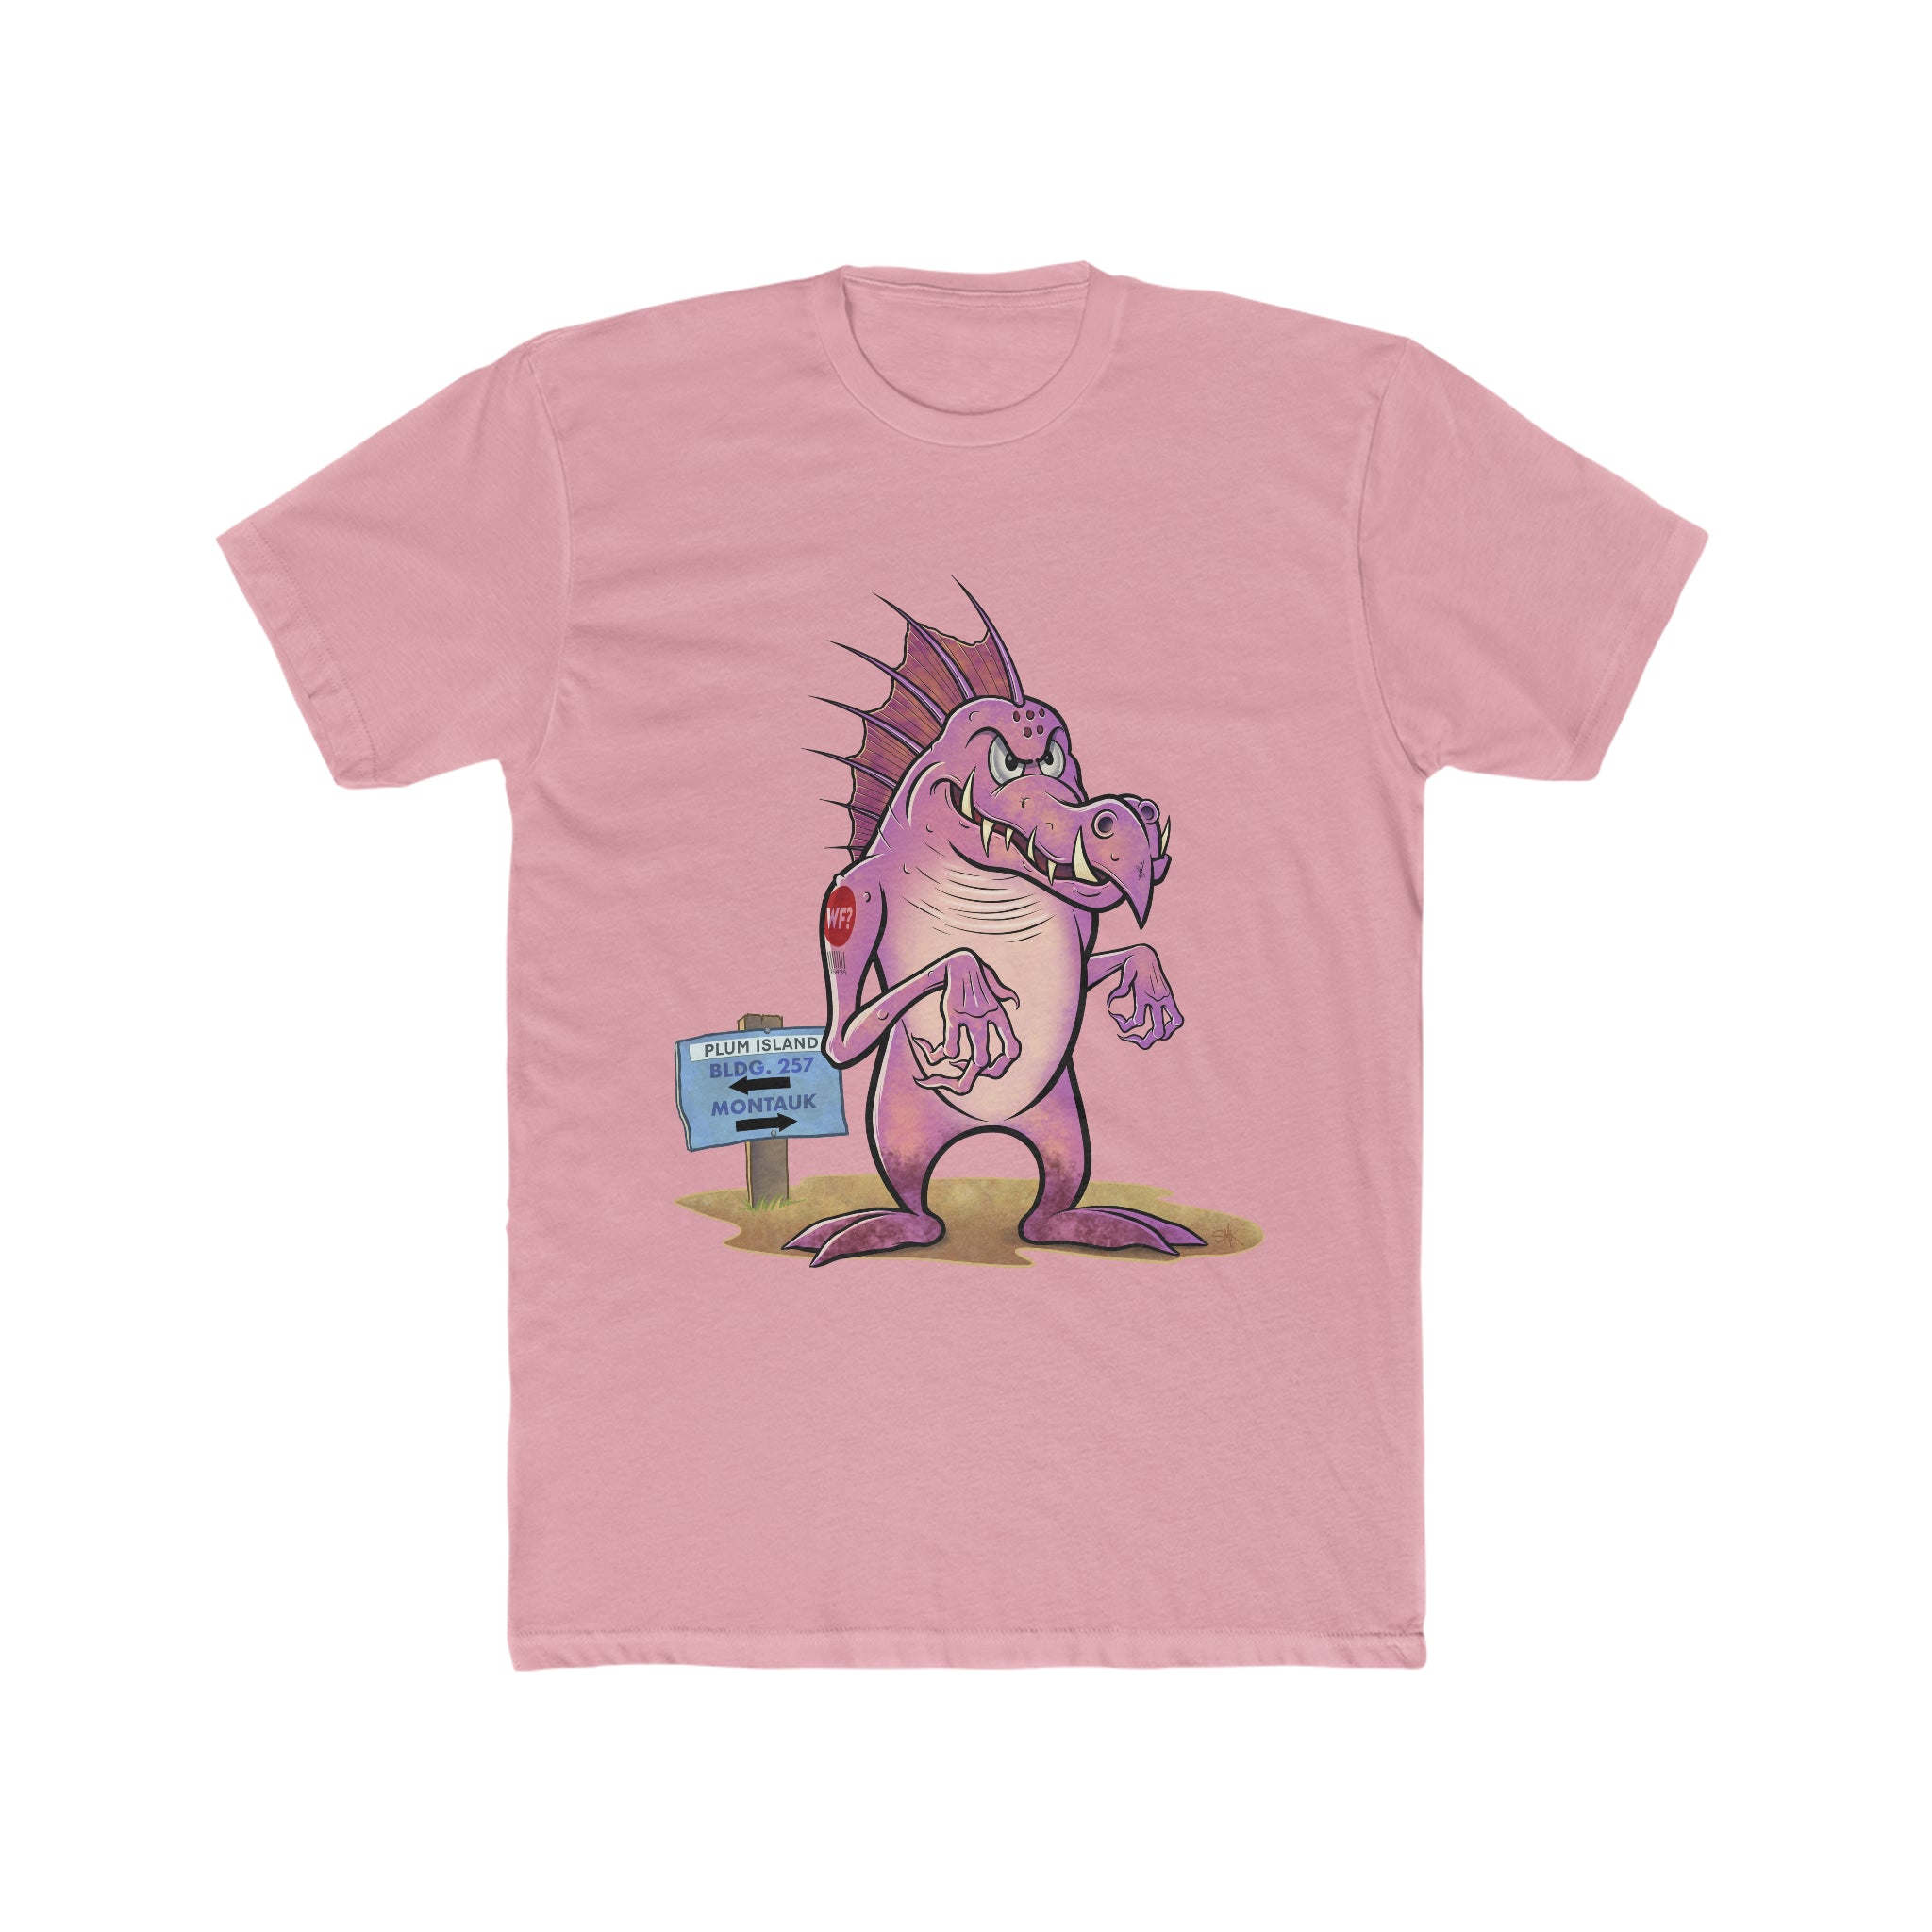 Buy solid-light-pink Plum Island Limited T-Shirt